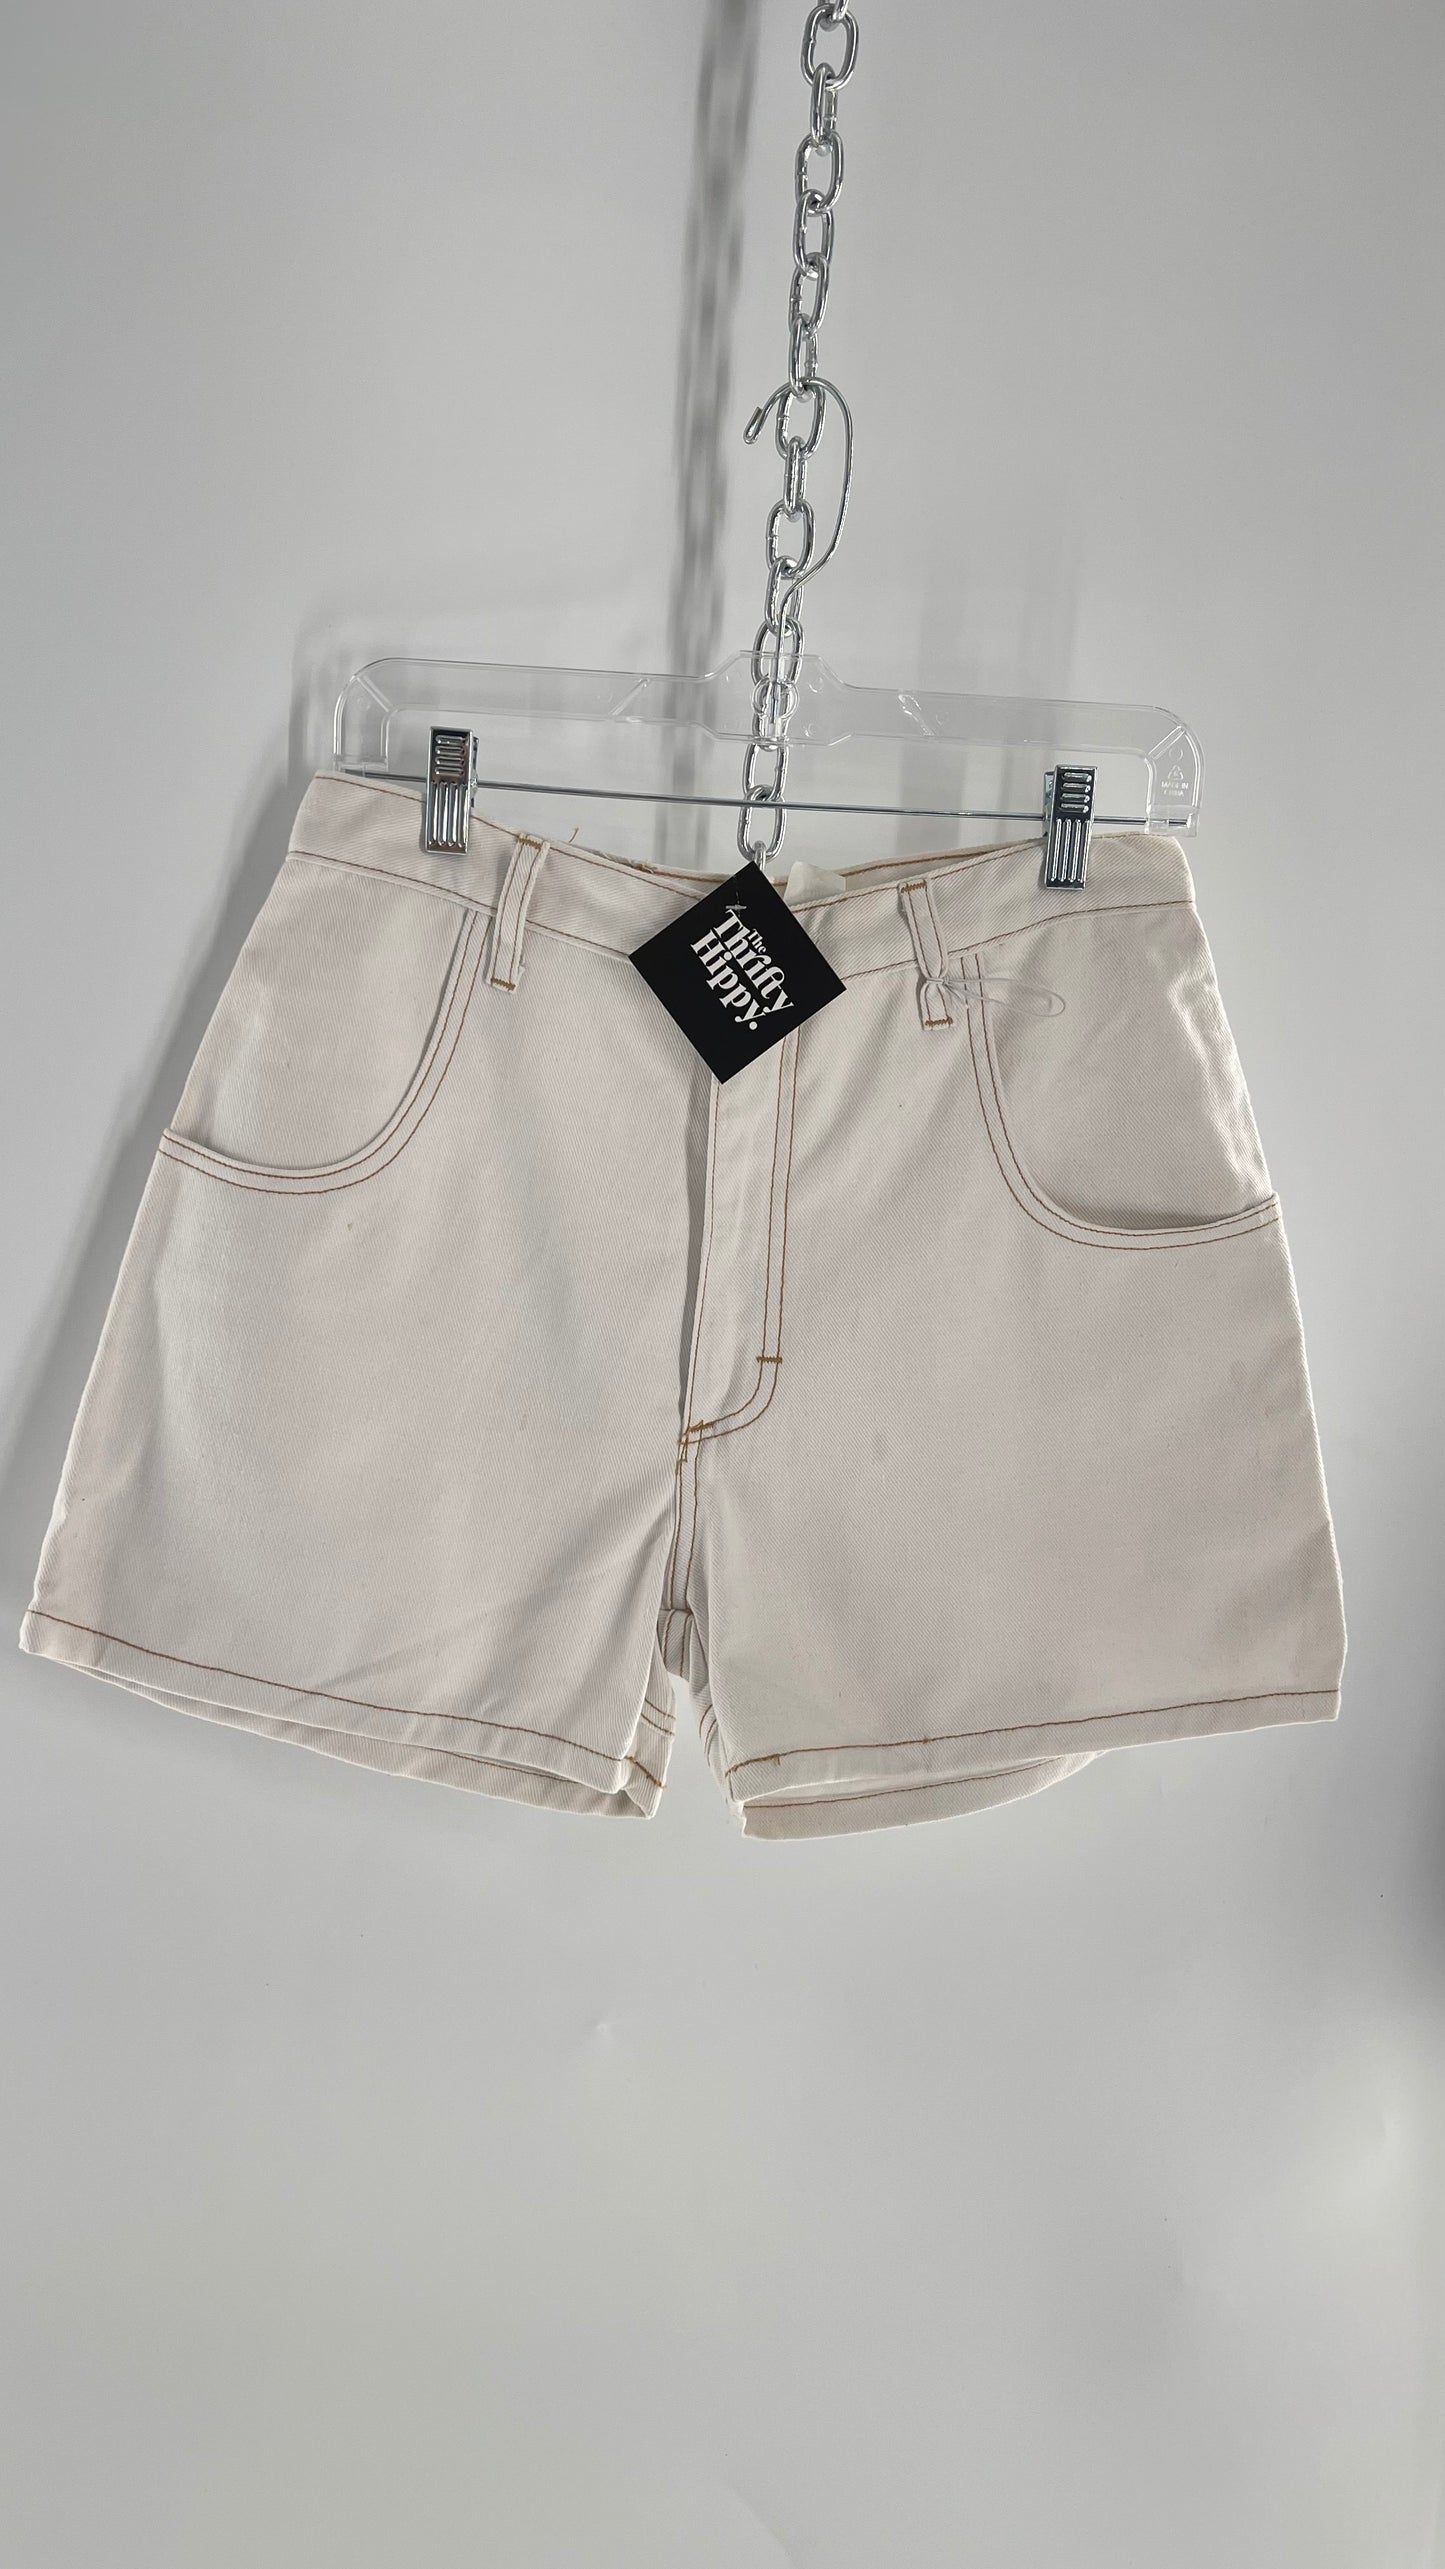 Vintage 1980s Generation X-ers White Contrast Stitch Shorts with Double Waistline on Bum (28)